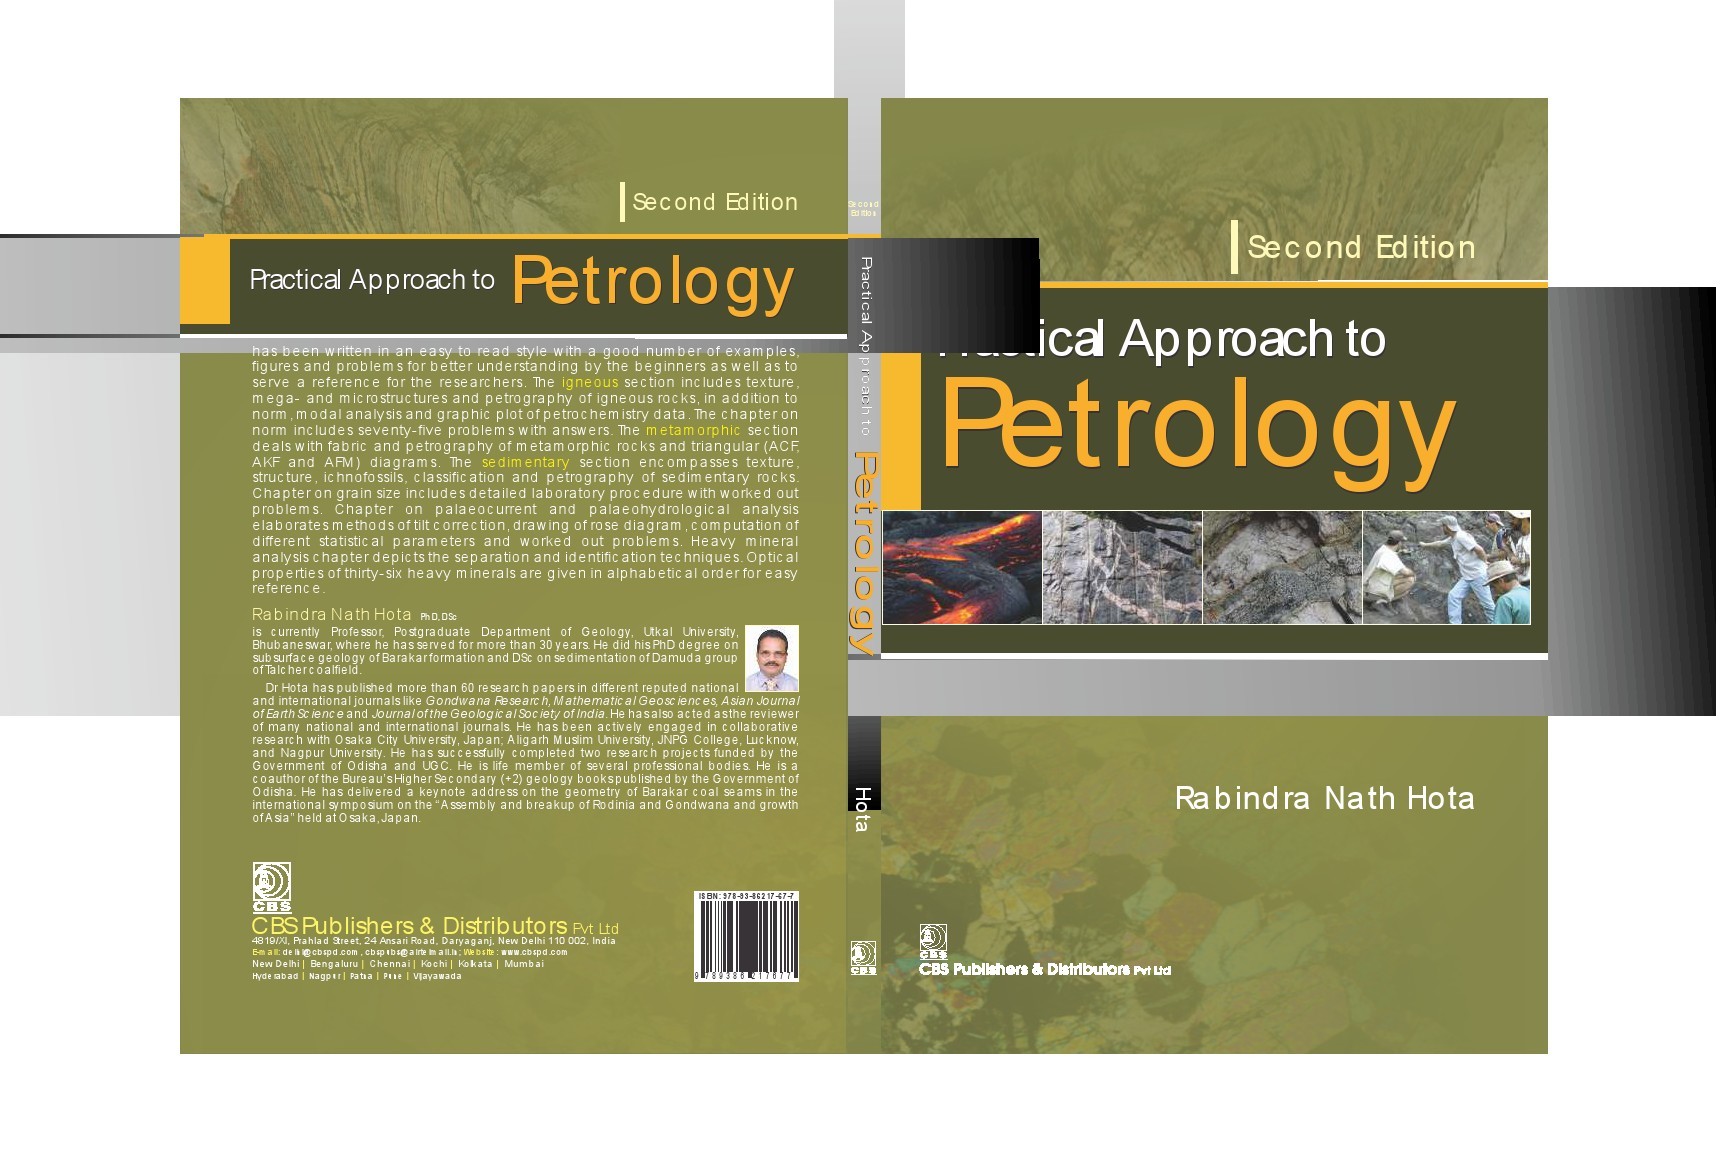 Practical Approach to Petrology